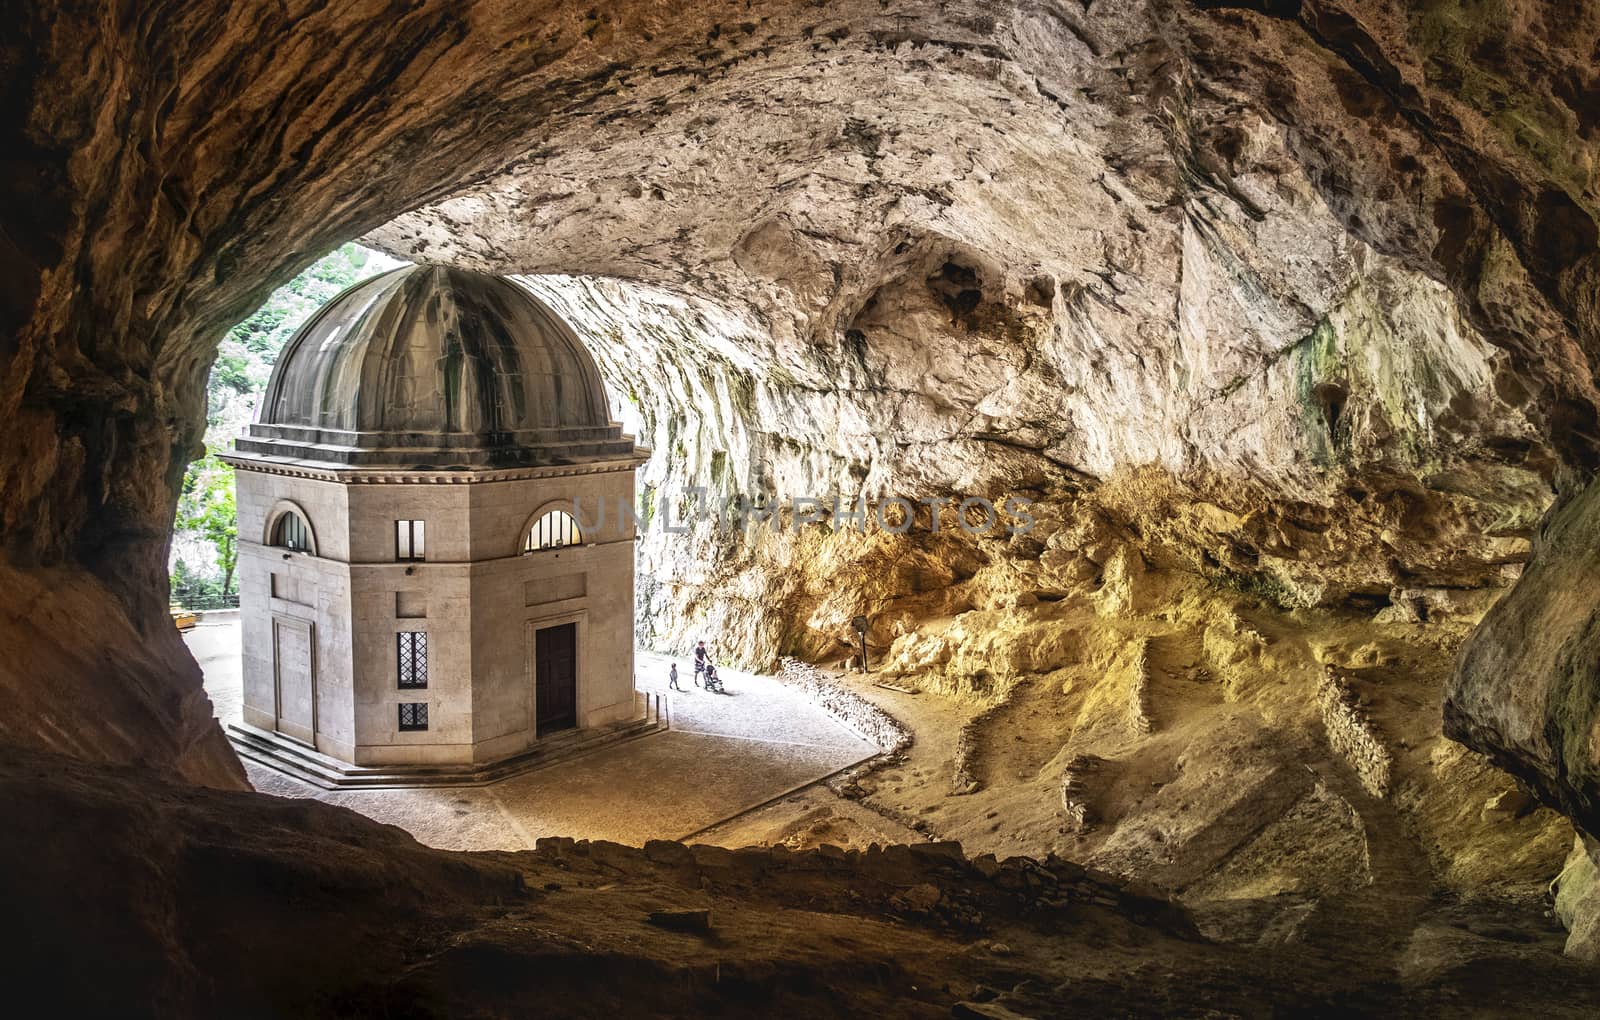 church inside cave in Italy - Marche - the temple of Valadier church near Frasassi caves in Genga Ancona by LucaLorenzelli